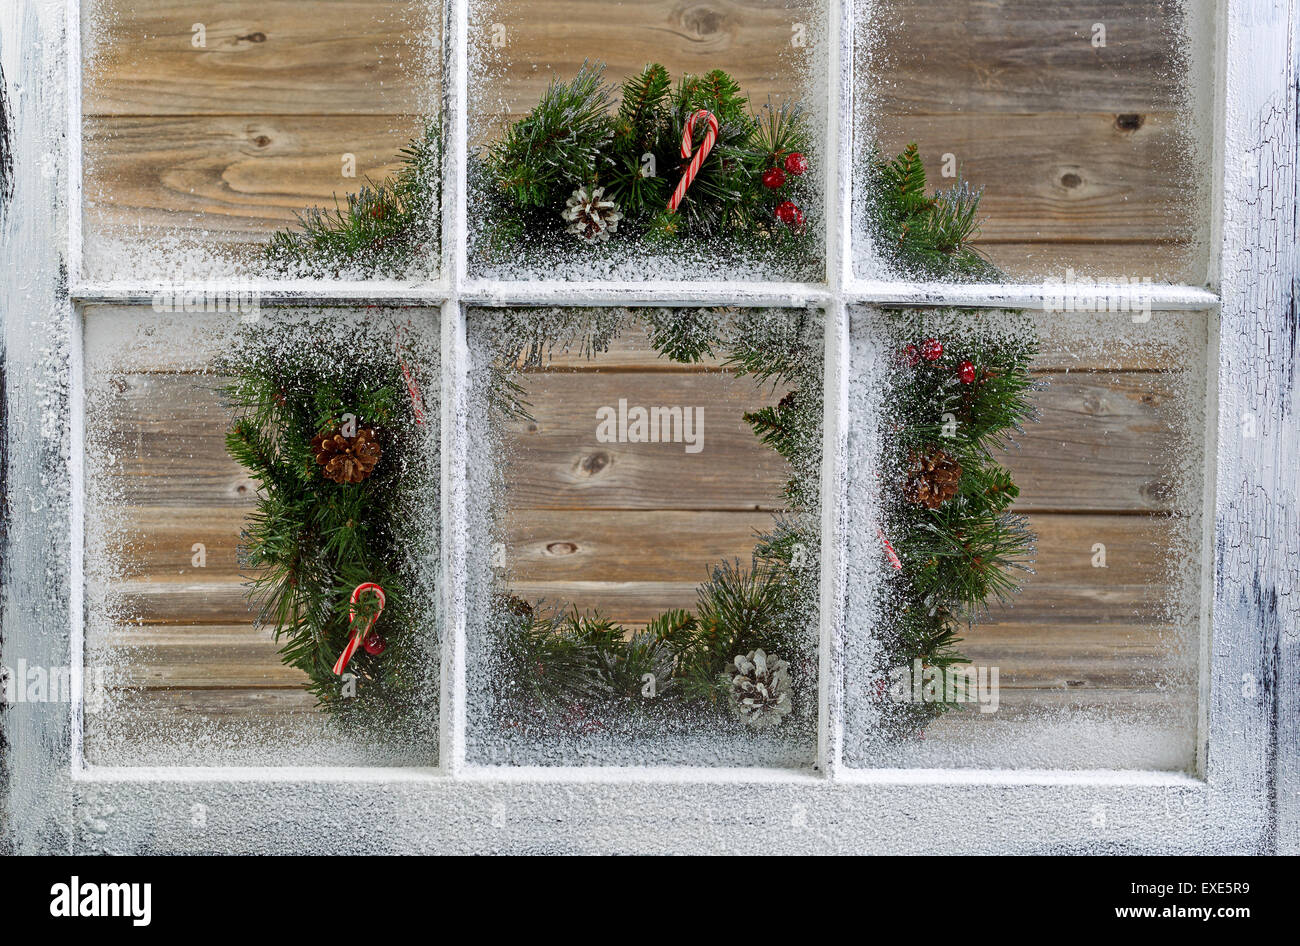 Snow covered window with decorative Christmas wreath on window with rustic wood in background. Stock Photo